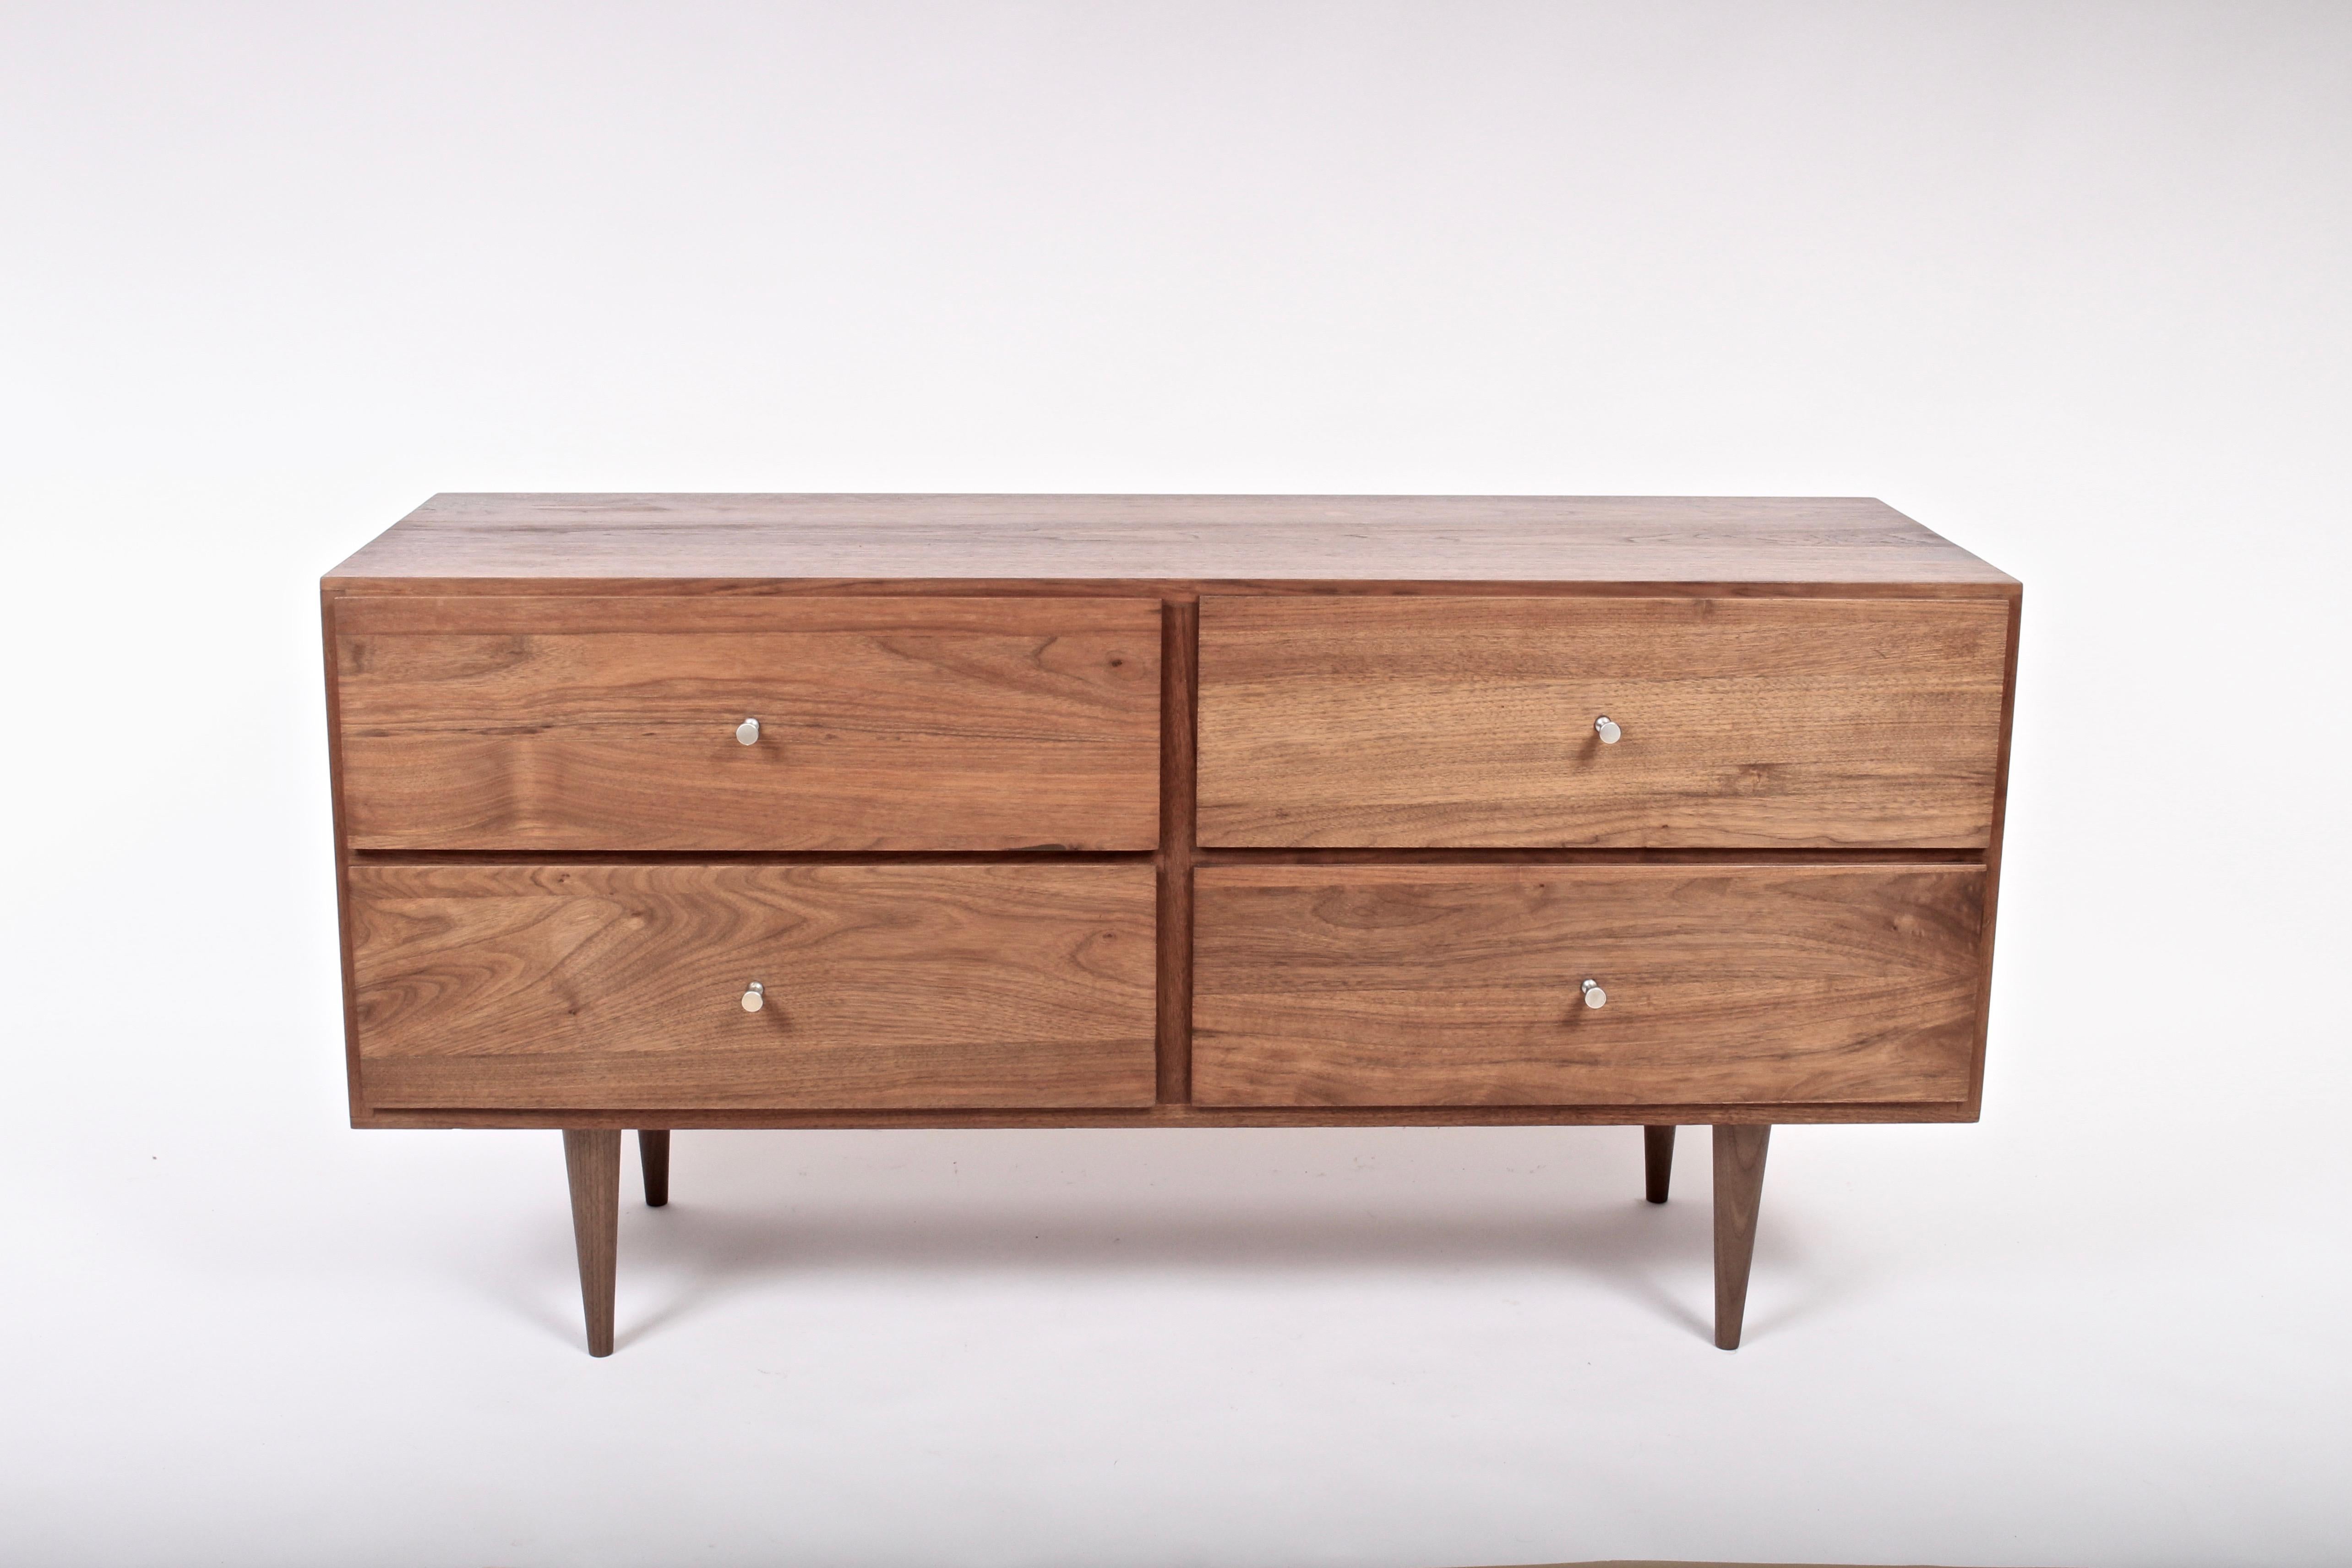 American Mid-Century Modern Country Workshop solid black walnut four drawer nightstand, low dresser. In the manner of Paul McCobb. Rectangular, stackable, excellent storage and nickel-plated drawer pulls. Can be utilized as modular furniture. Legs